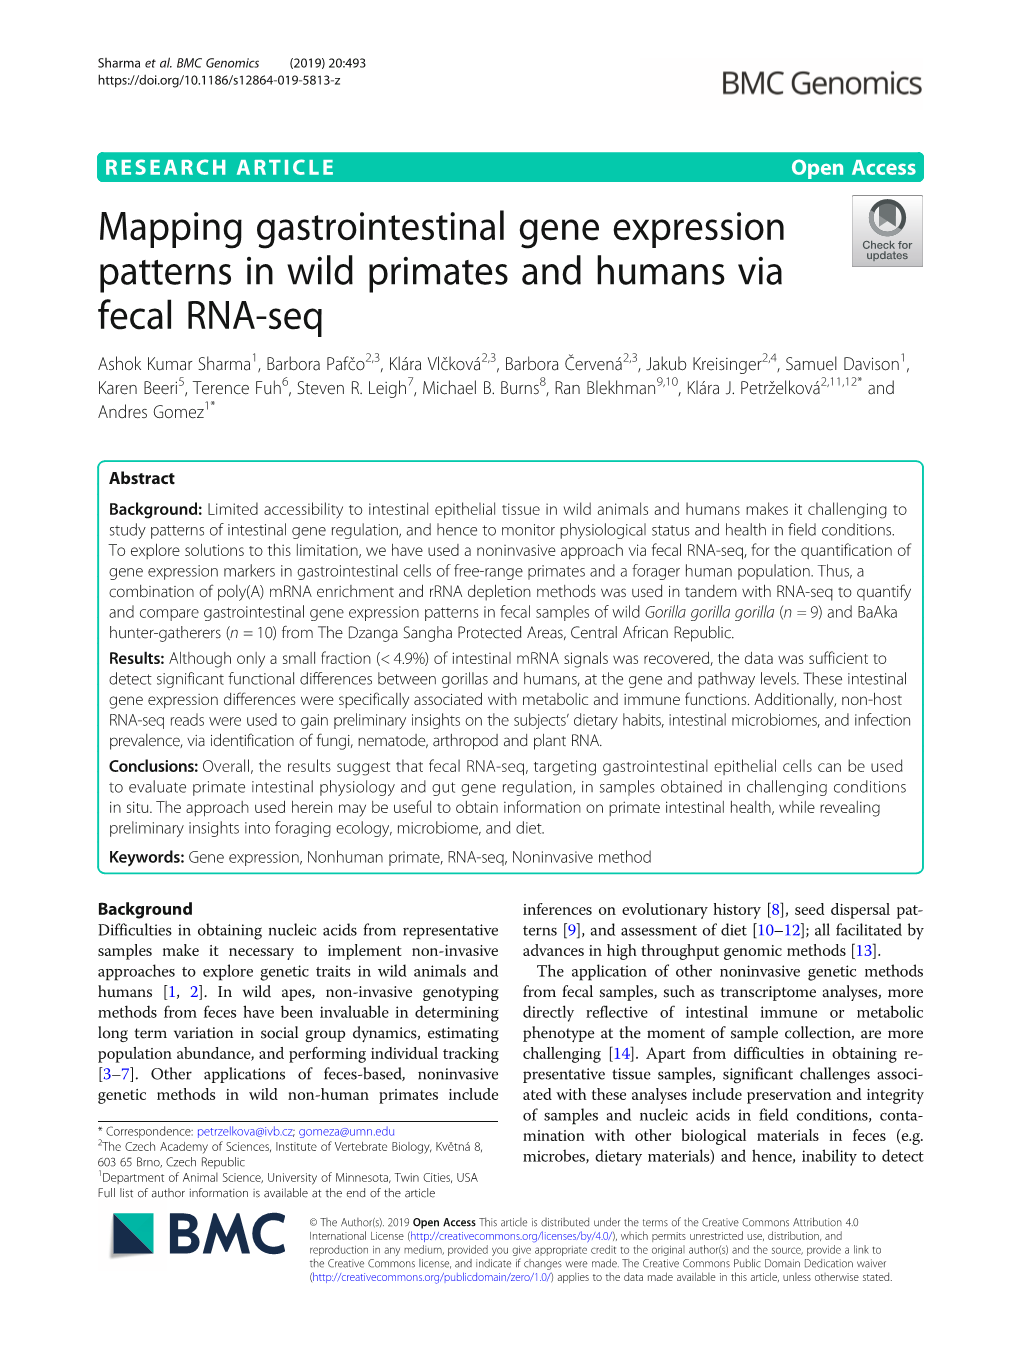 Mapping Gastrointestinal Gene Expression Patterns in Wild Primates